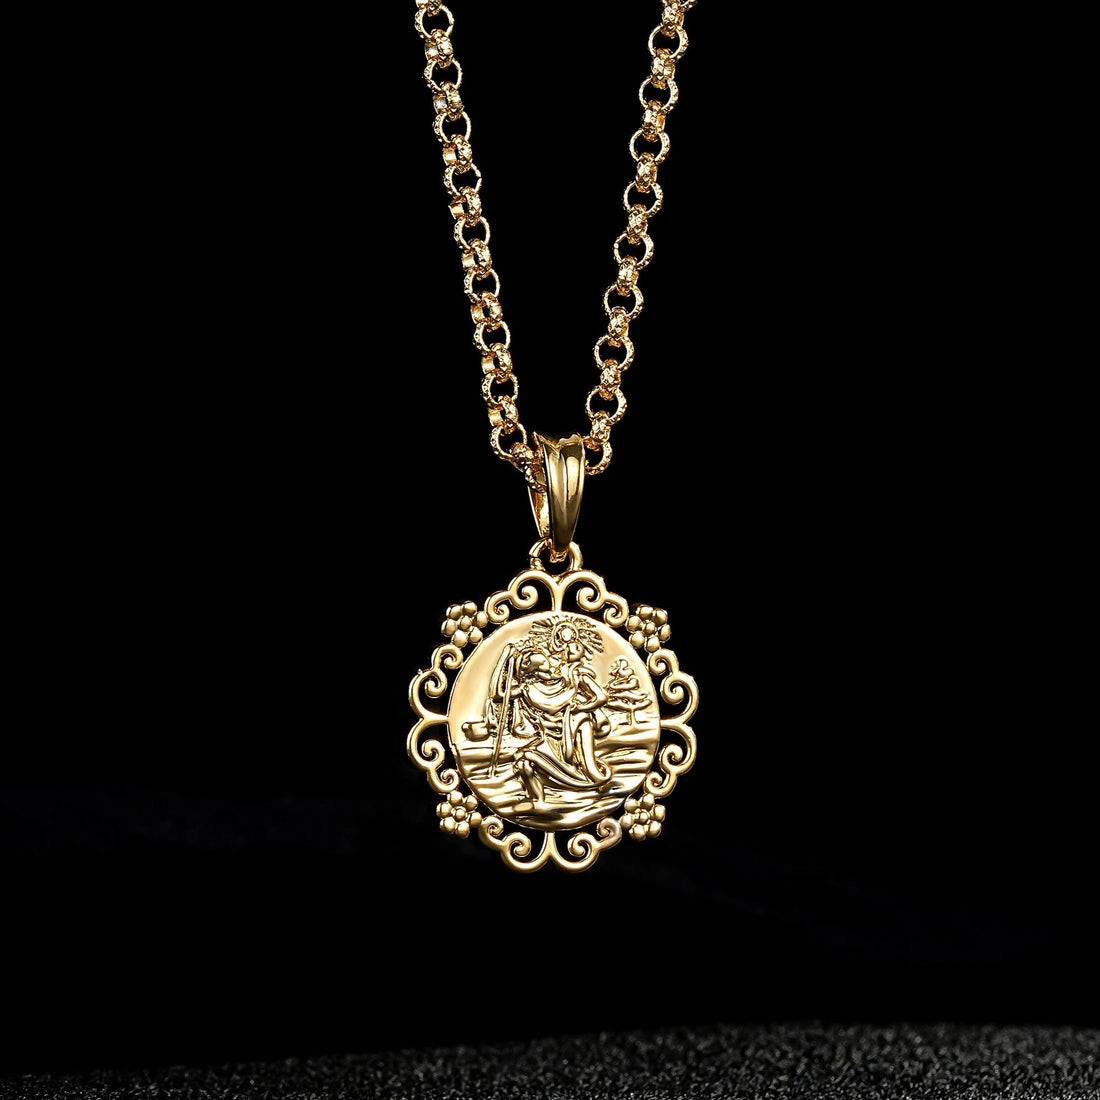 Waterproof Gold St Christopher Pendant with Flower Mount